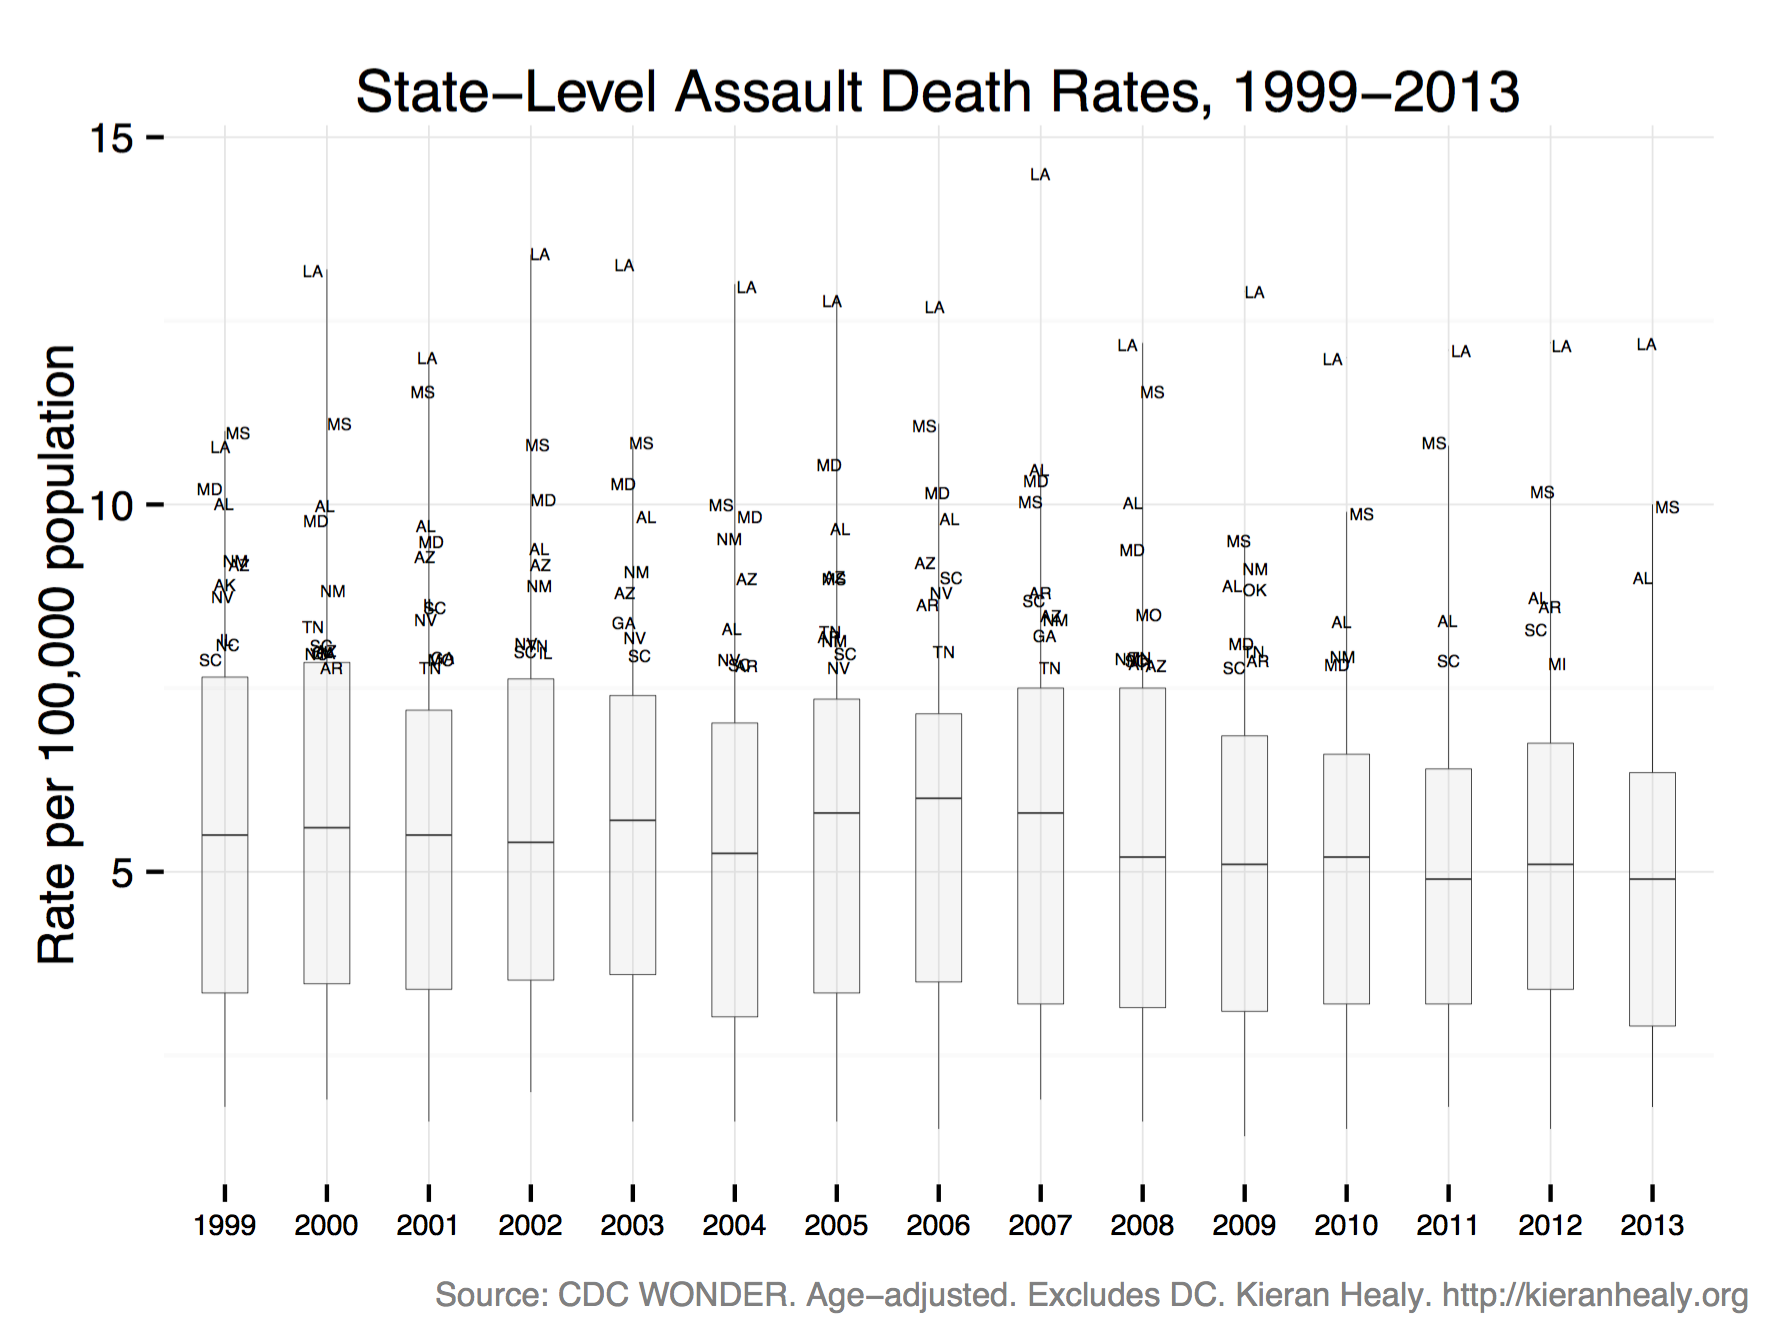 Assault Death rates in US States, 1999-2013.